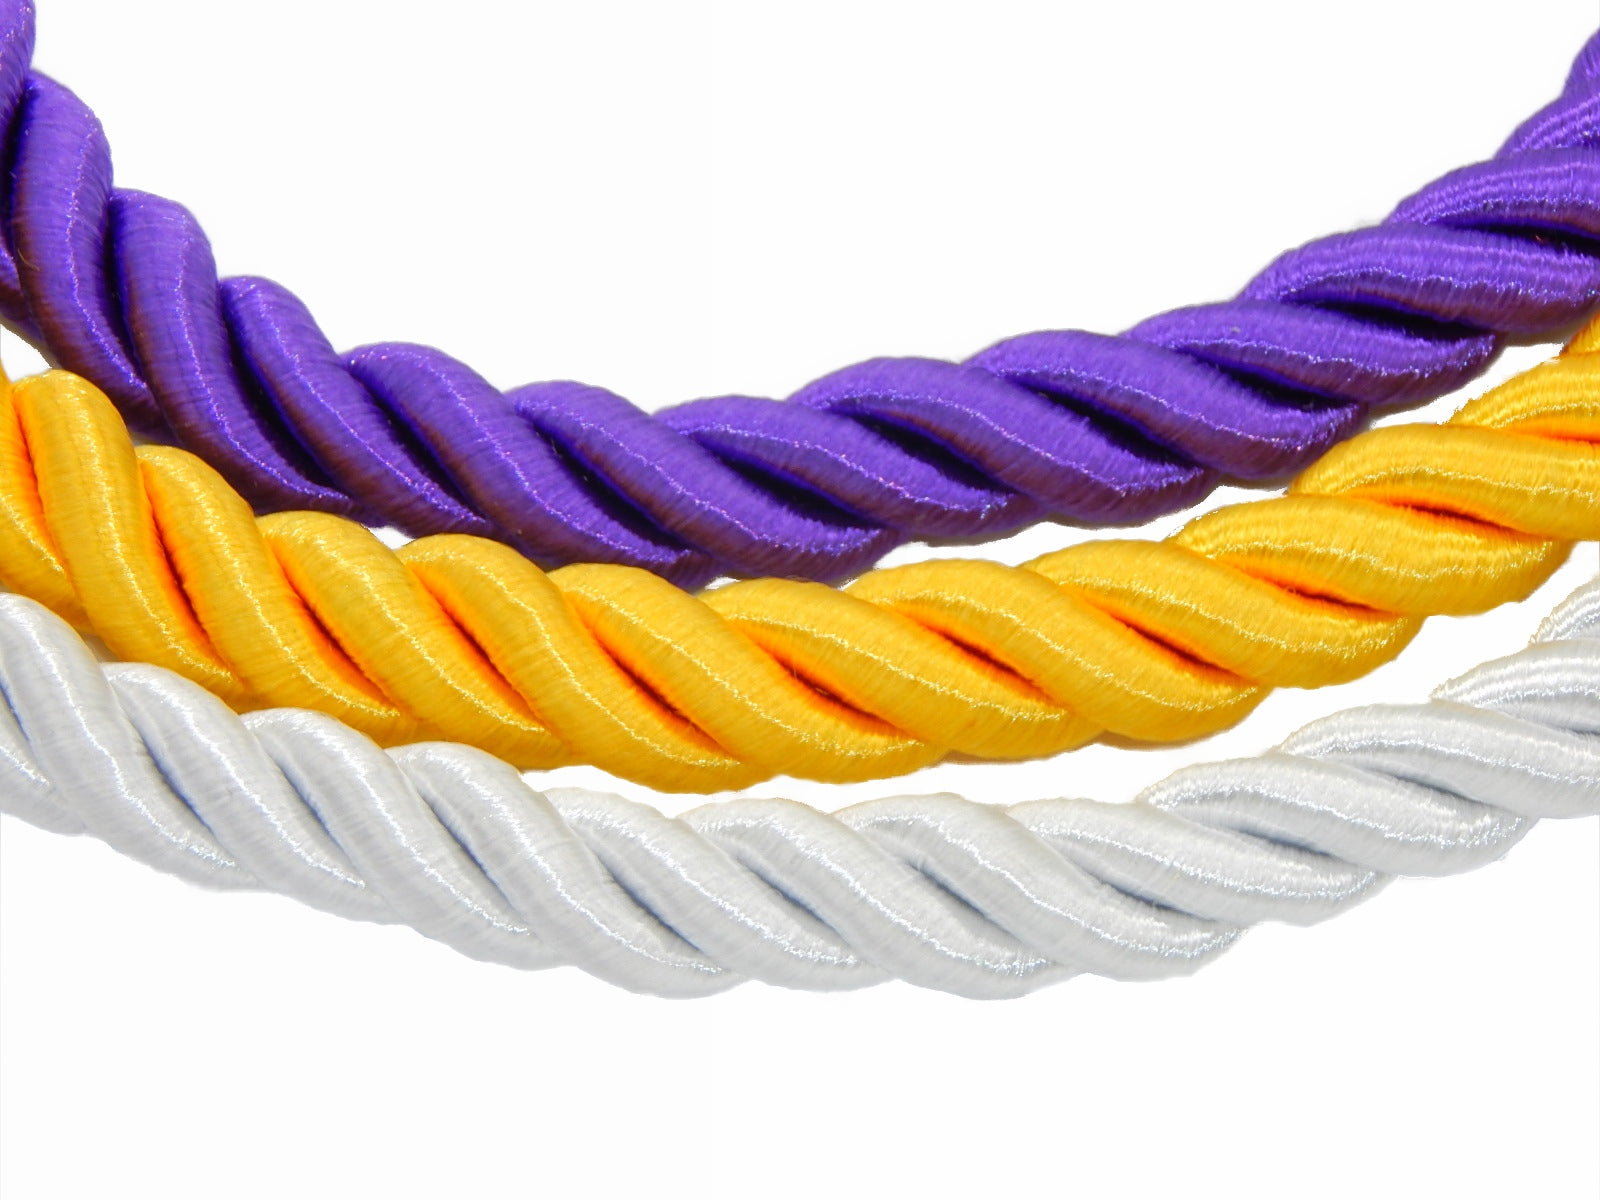 Unity Braids® Cord Of Three Strands, Wedding Cords, Vow Renewal, Tying the Knot